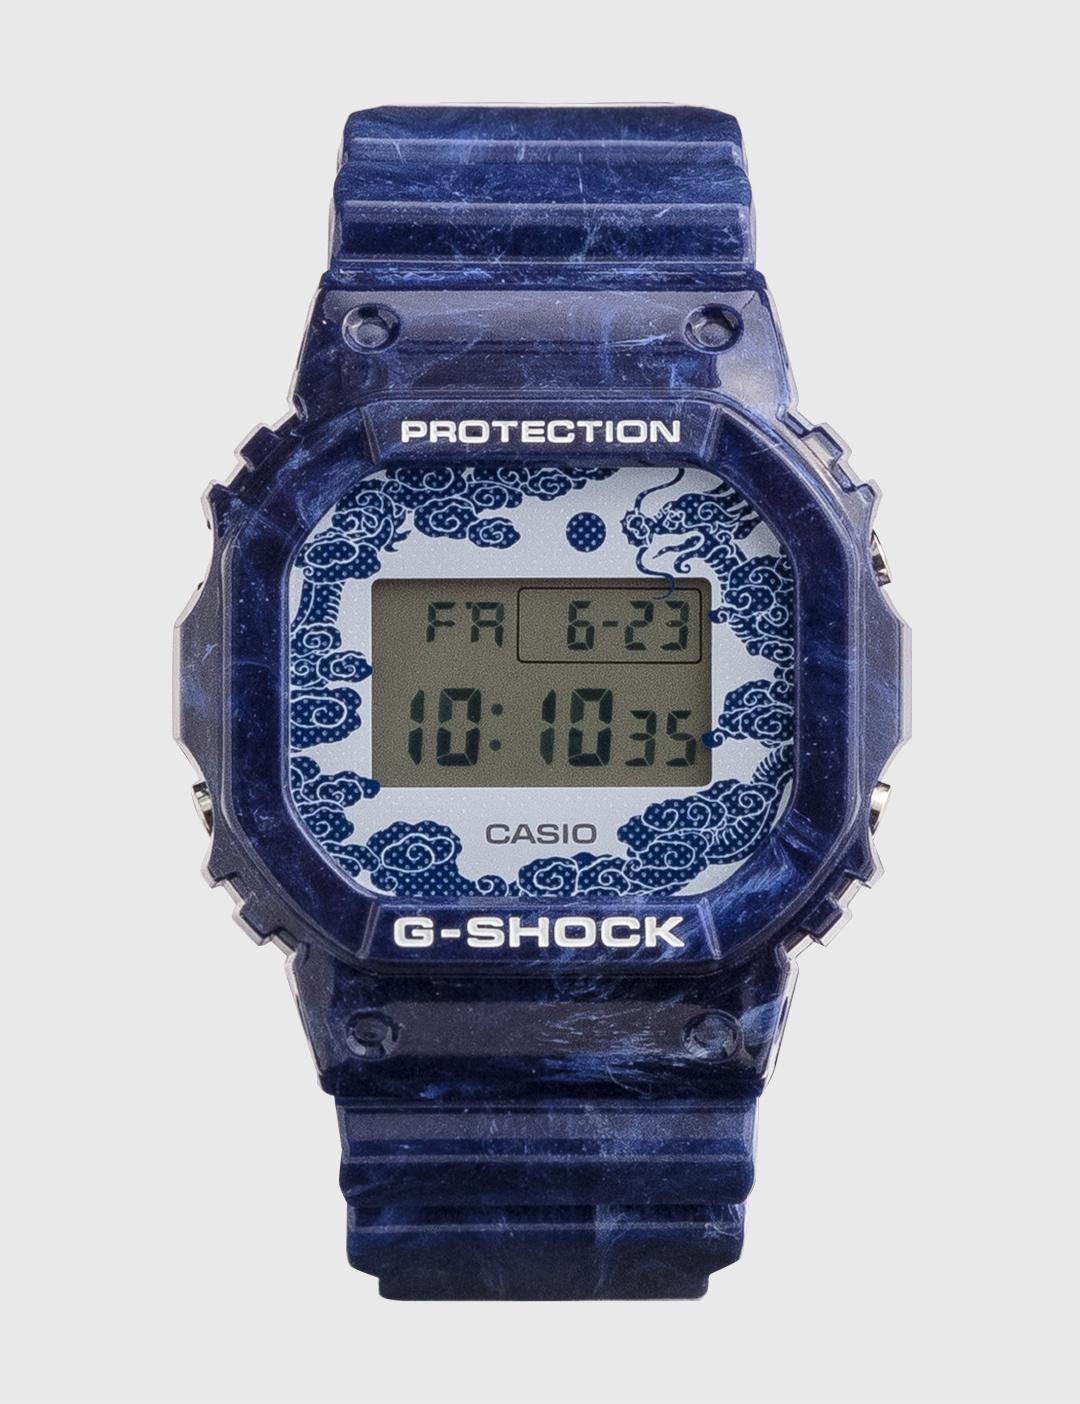 Subcrew x G-Shock DW-5600BWP-2 by CASIO